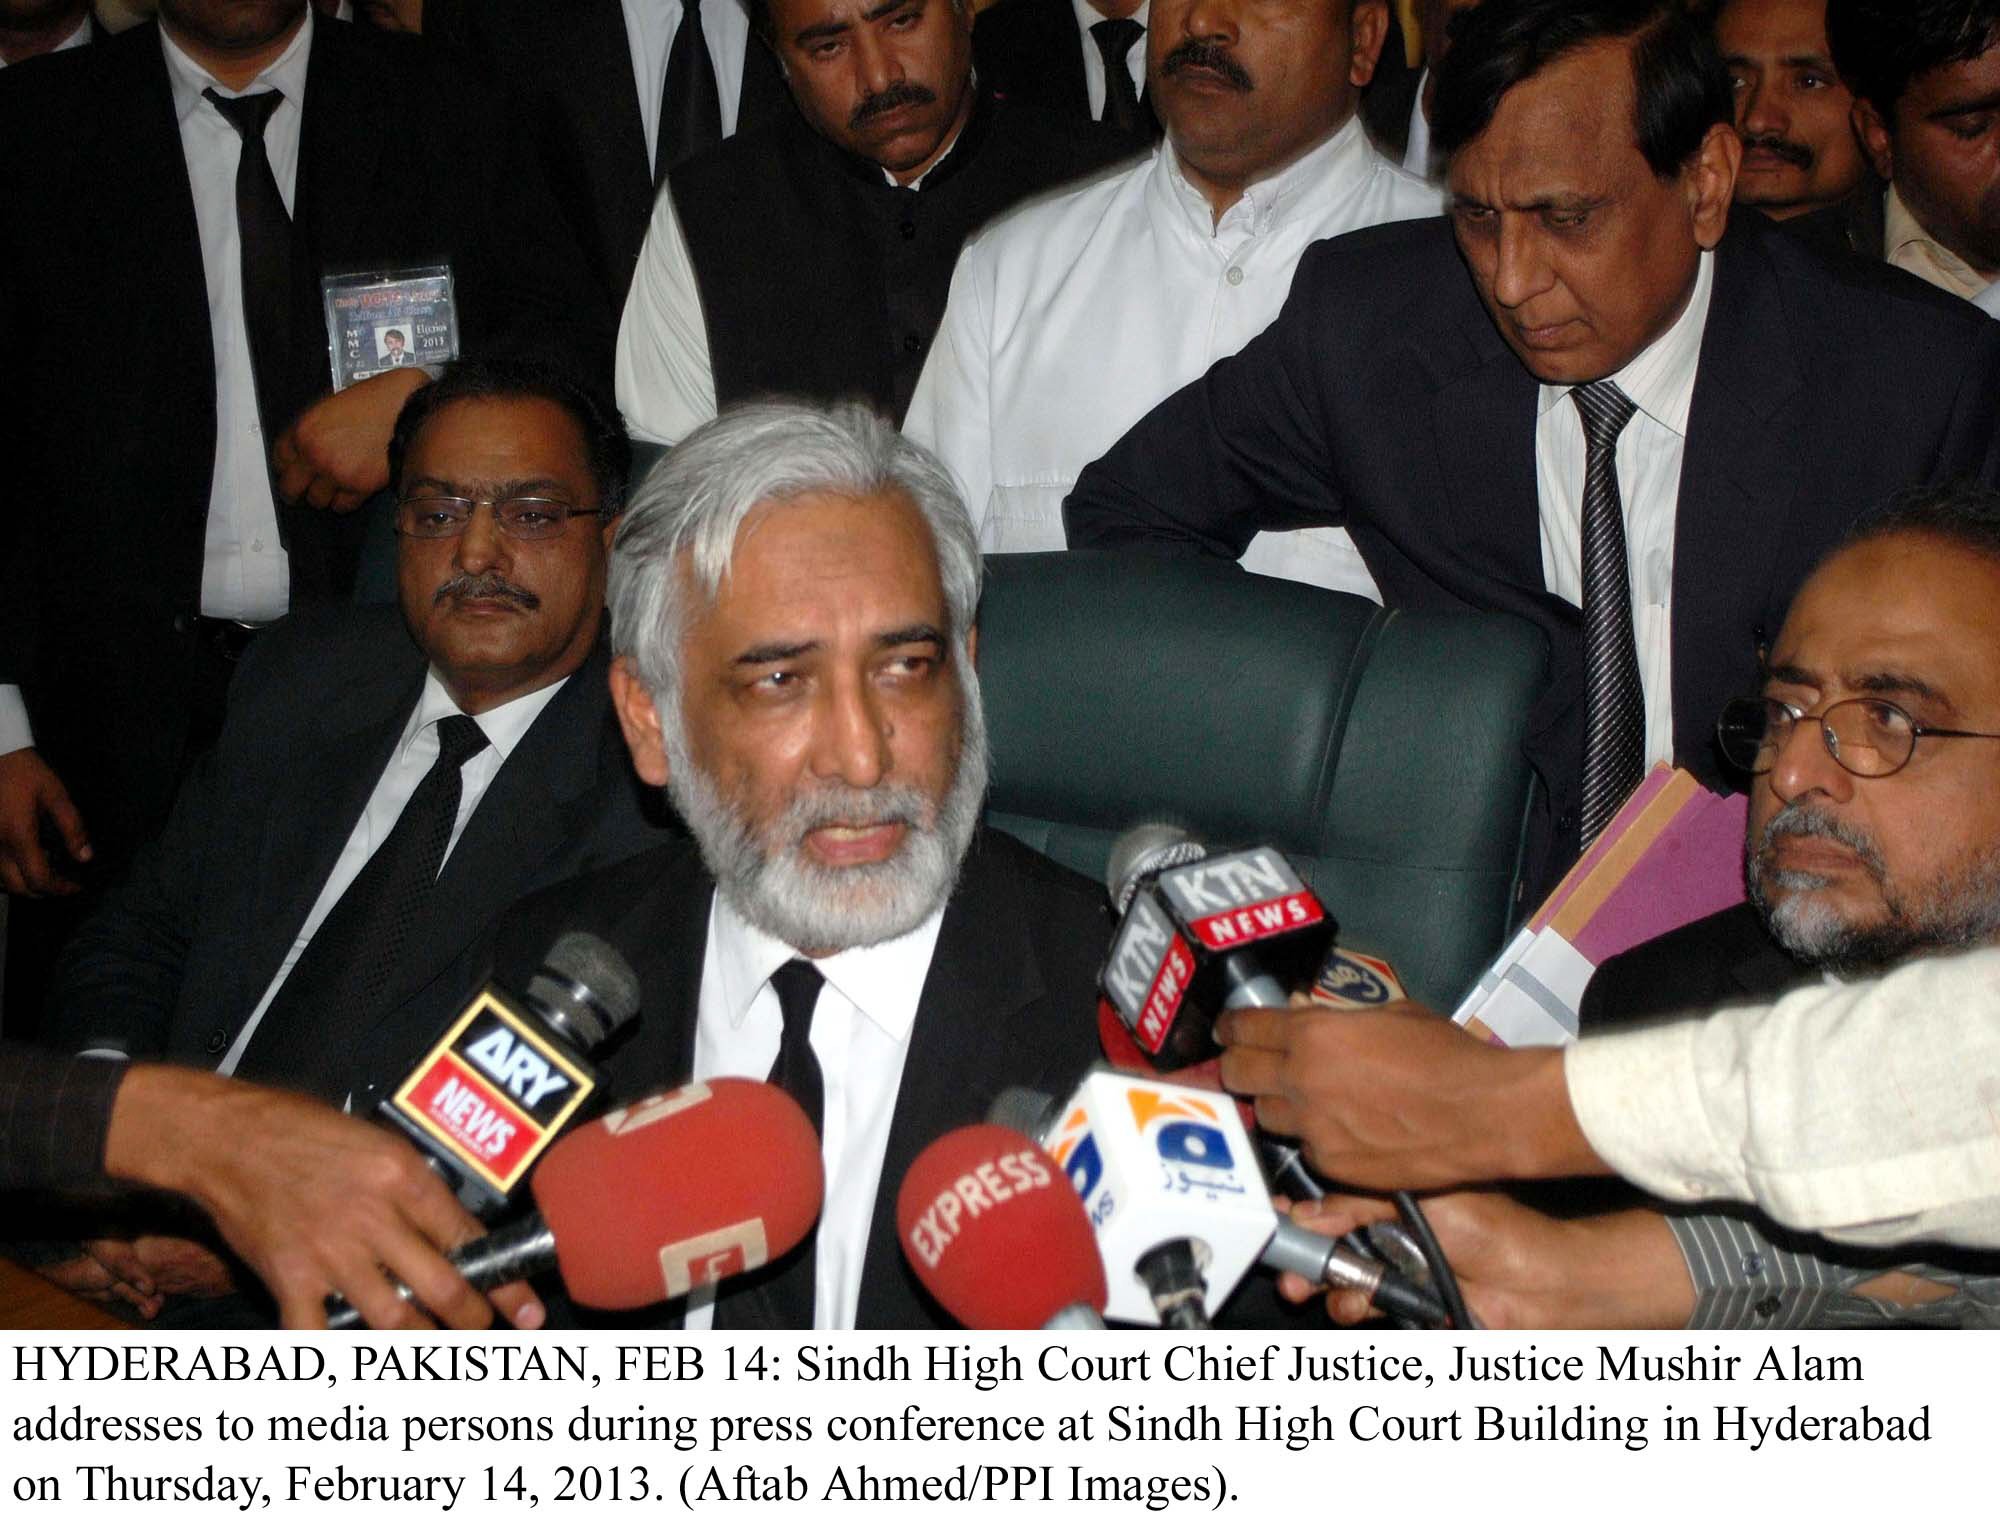 the meeting was convened by the chief justice following the attack on the convoy high court judge justice maqbool baqar on wednesday photo ppi file